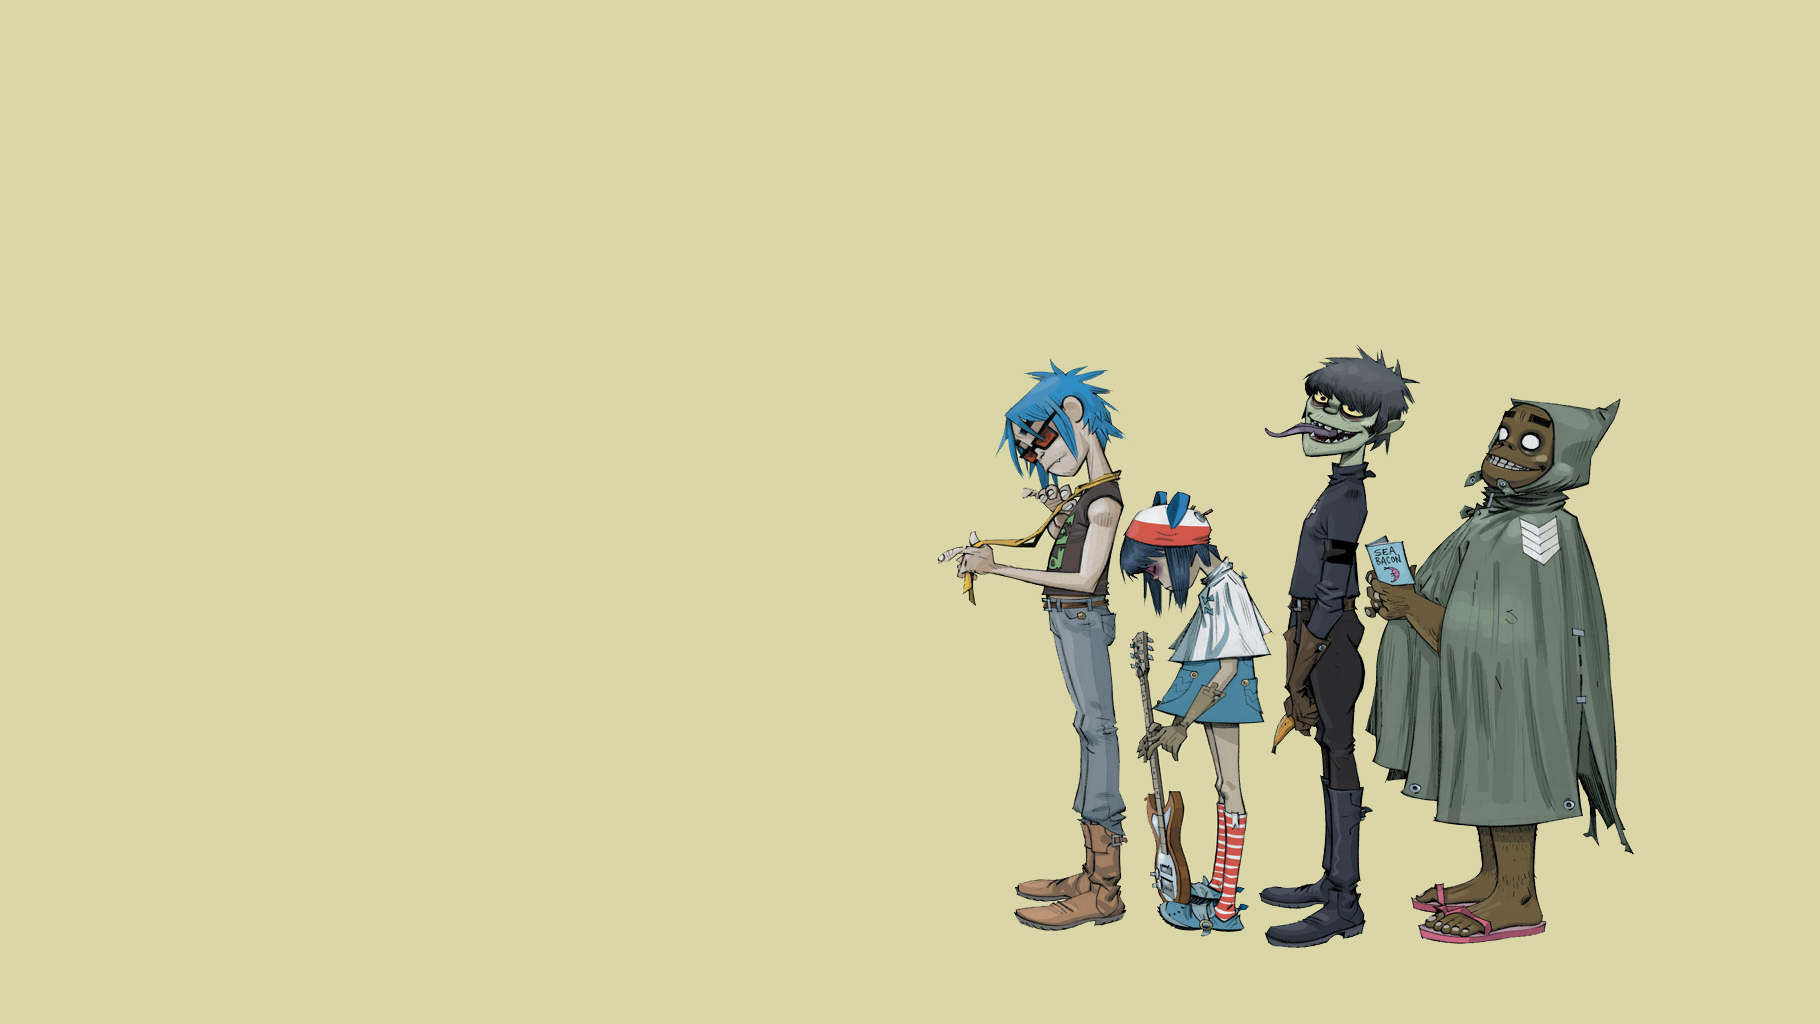 Download Gorillaz in 4K See the cartoonpop scene from a new angle  Wallpaper  Wallpaperscom